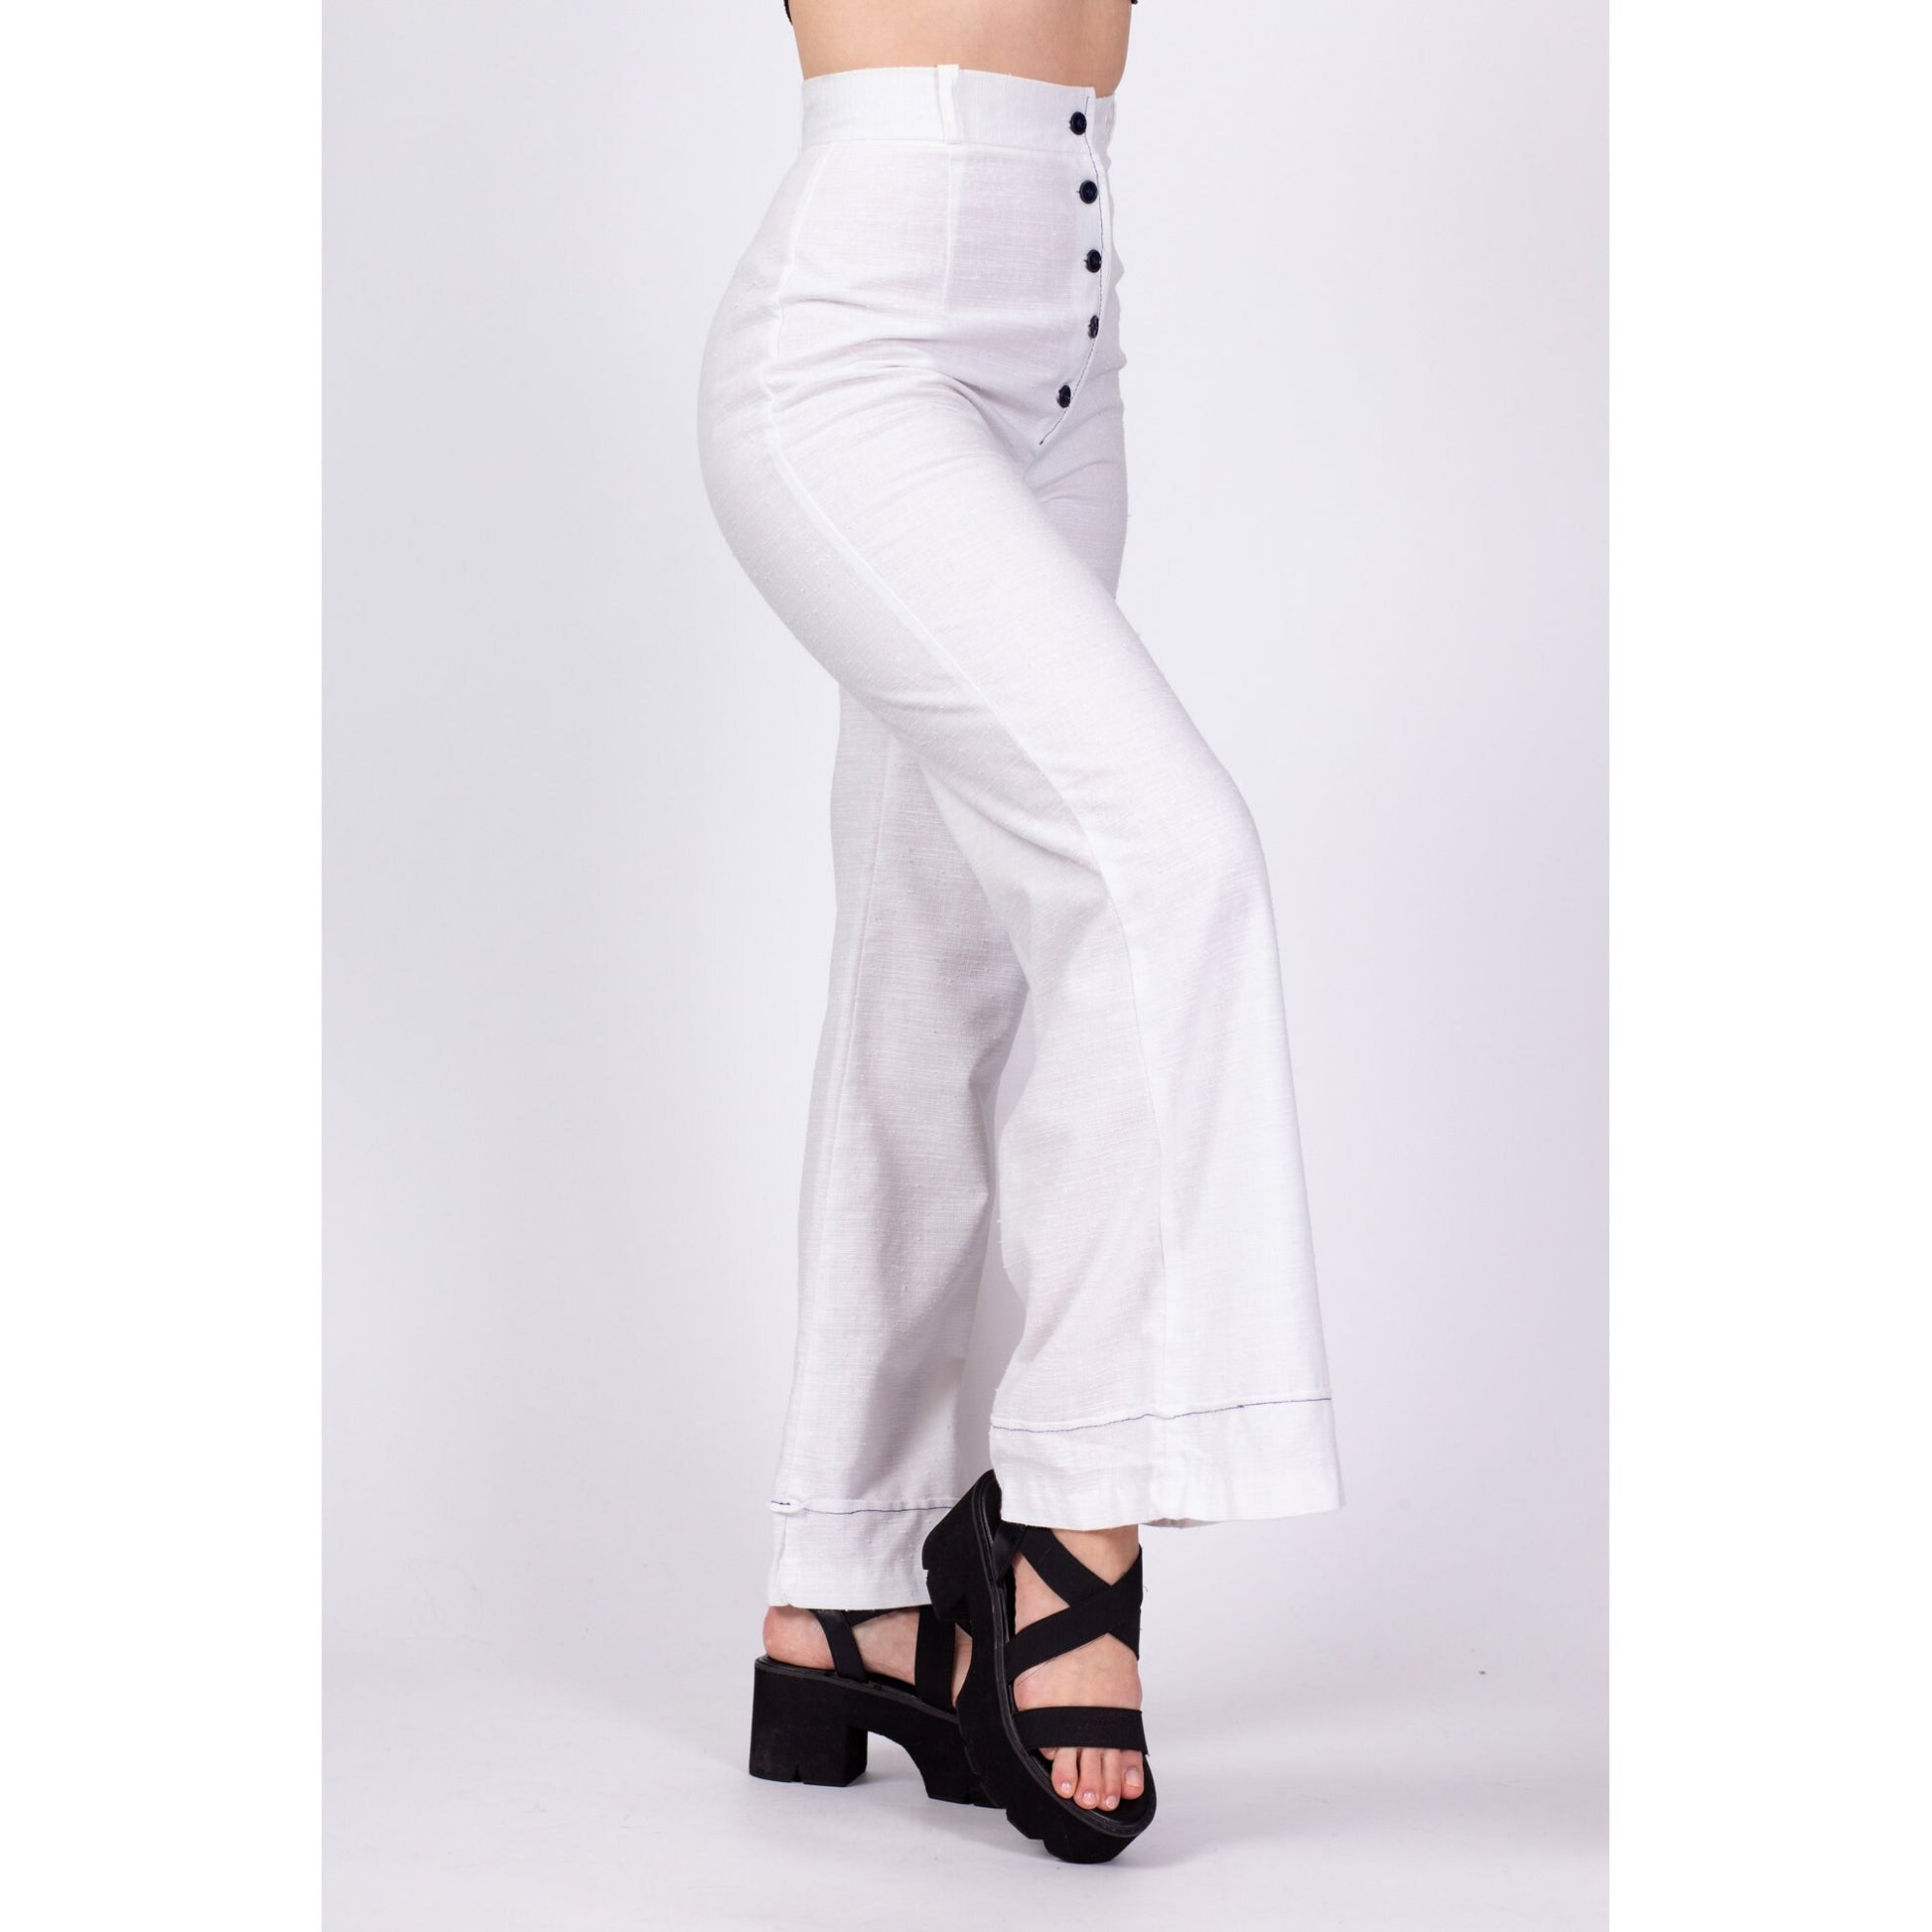 70s White Button Fly High Waisted Pants - Small, 25.5" 